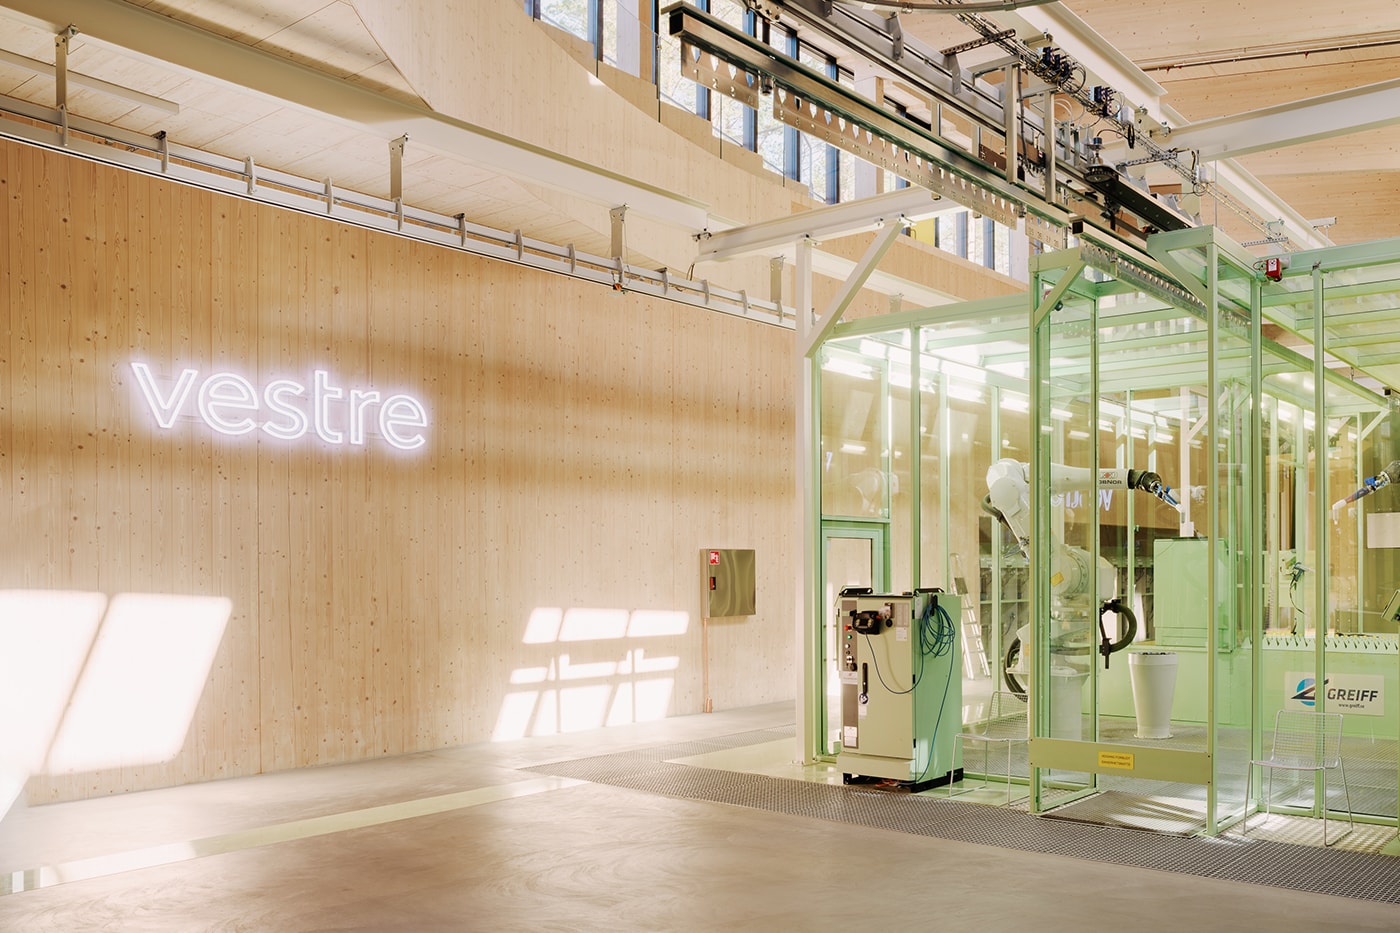 Bjarke Ingels Group Creates "World's Most Sustainable Factory" for Vestre